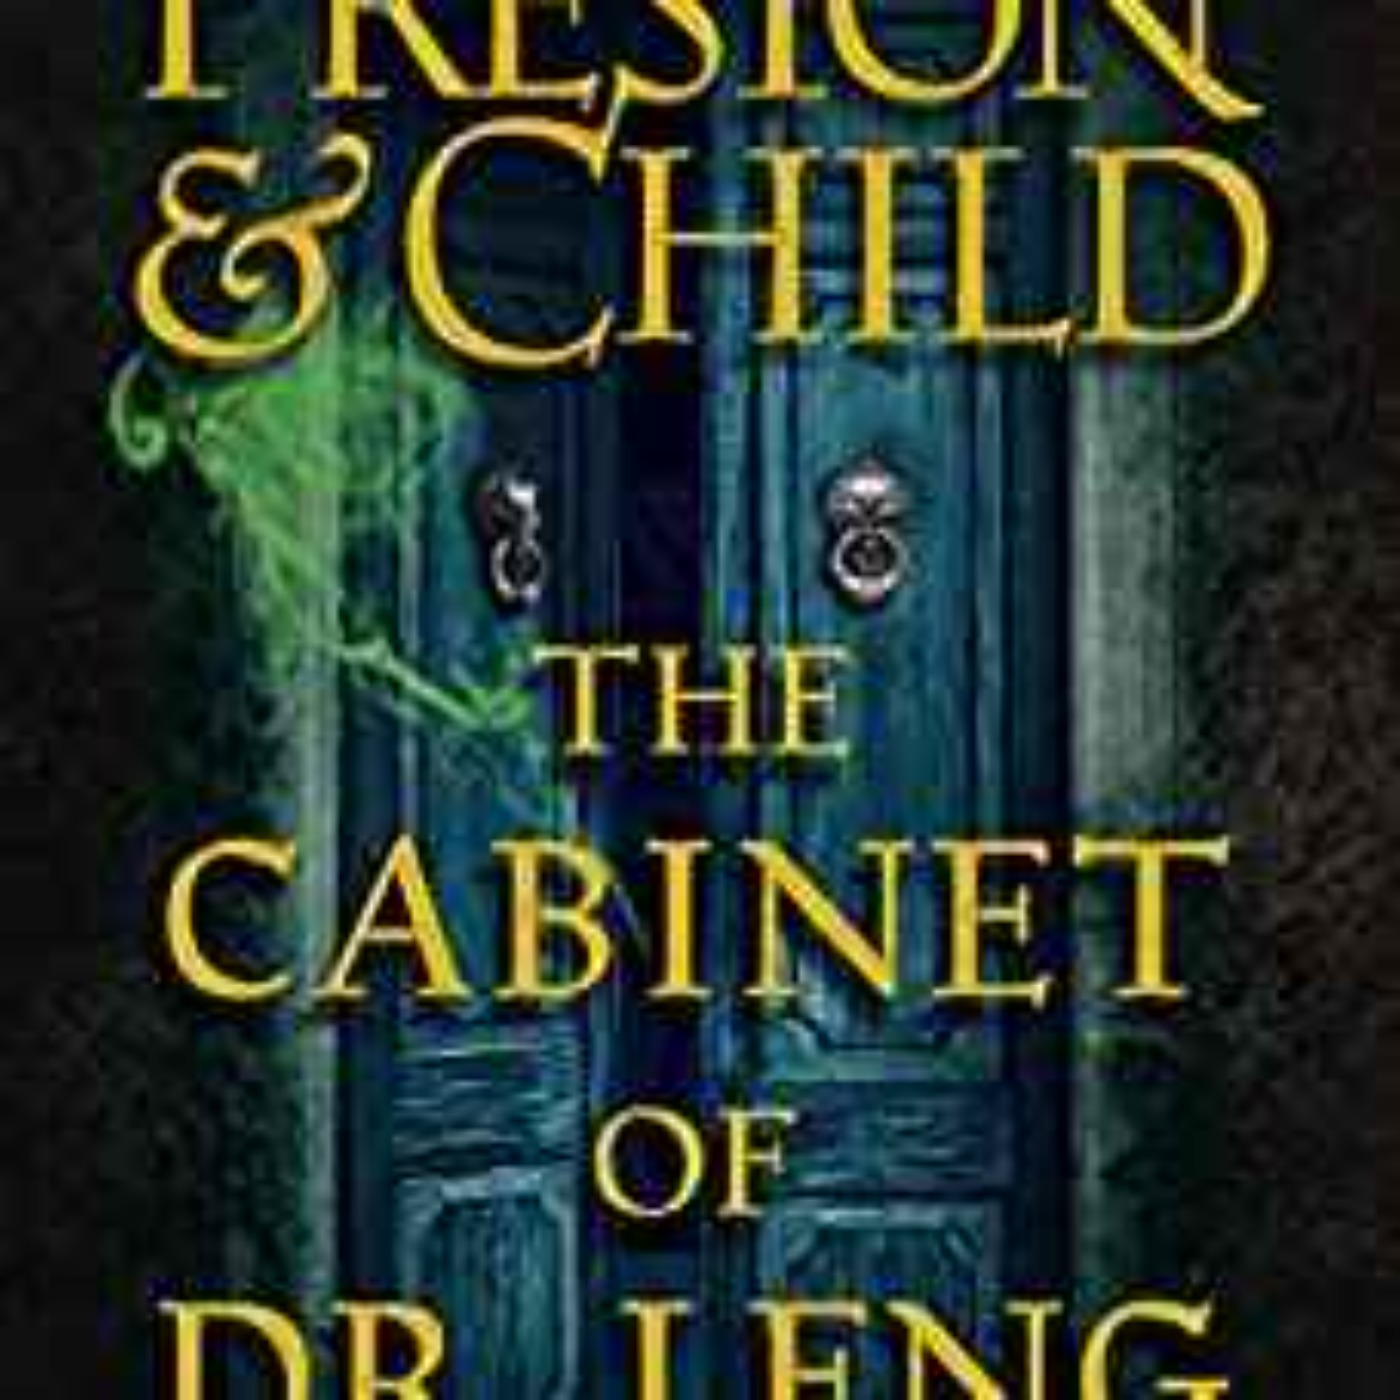 Preston & Child - The Cabinet of Dr. Leng